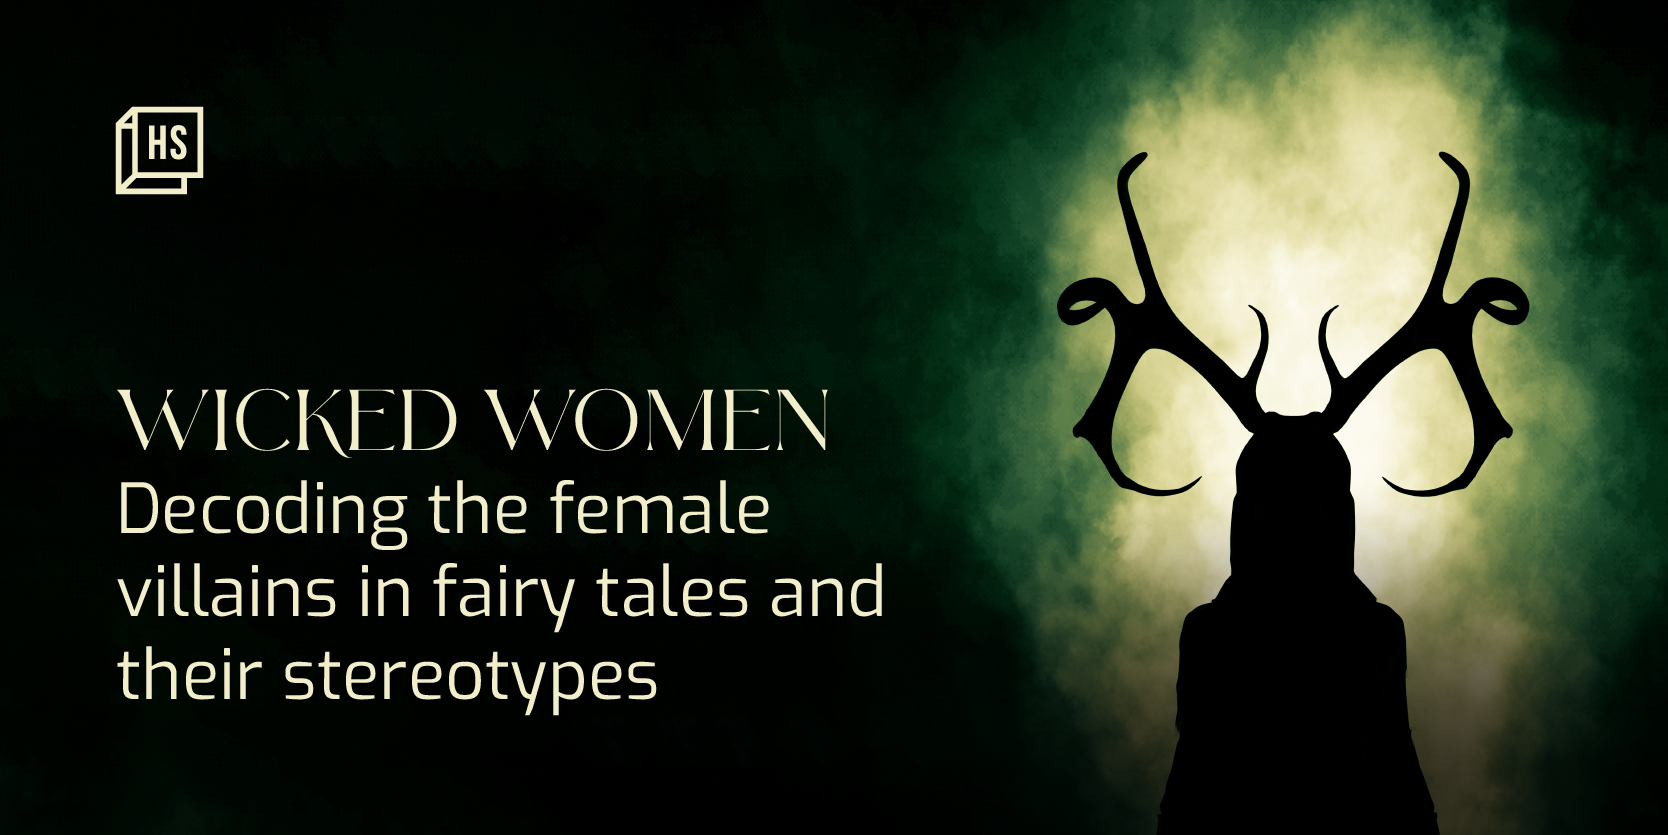 Decoding evil: Inside the stereotypical wicked women of fairy tales